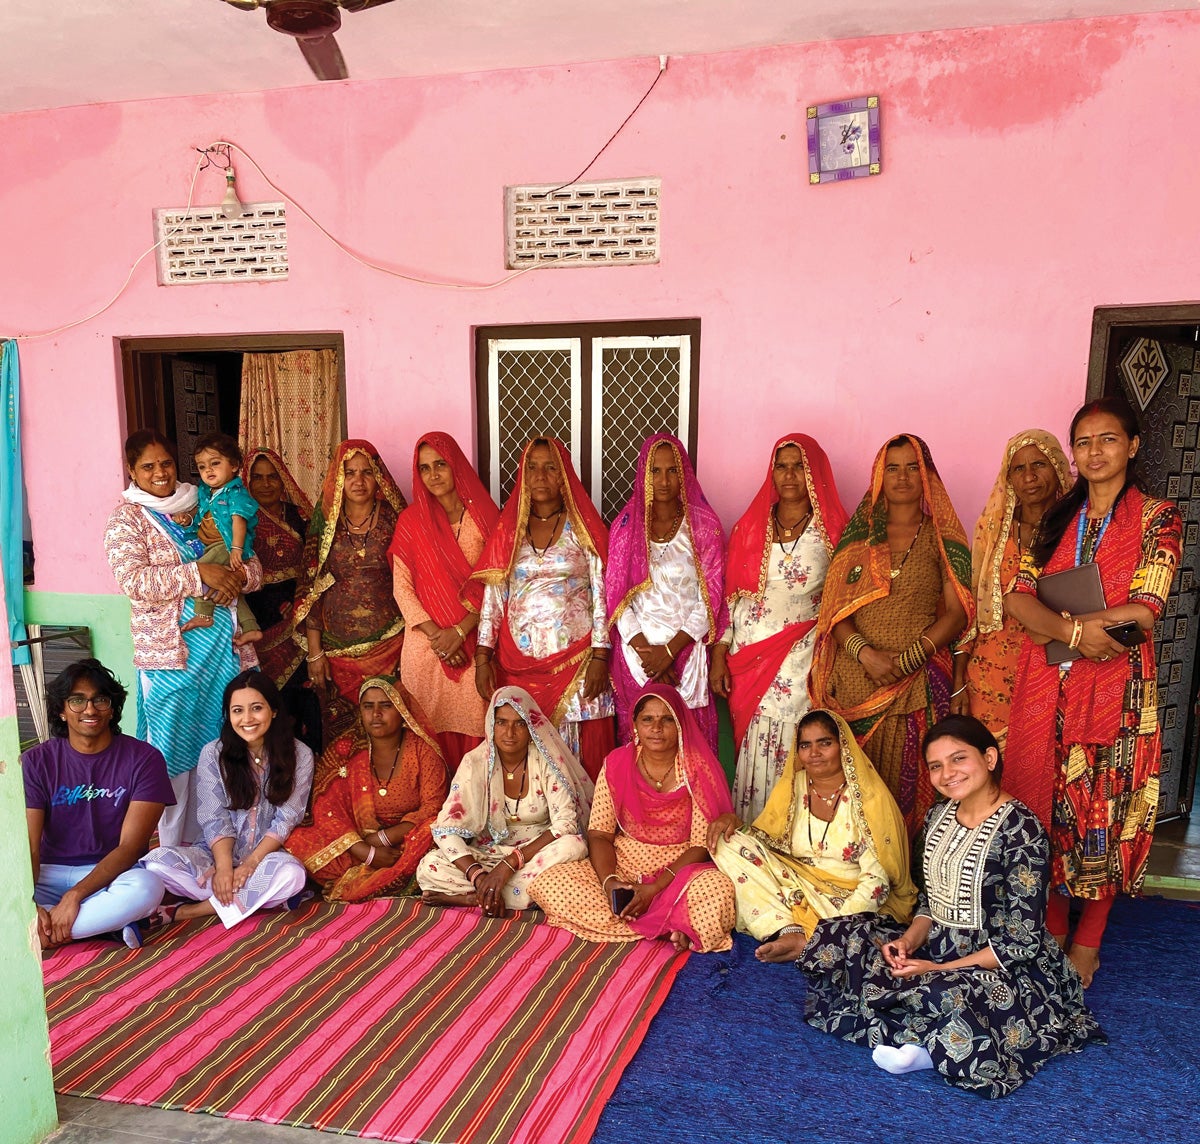 women in traditional Indian saris stand in a pink room